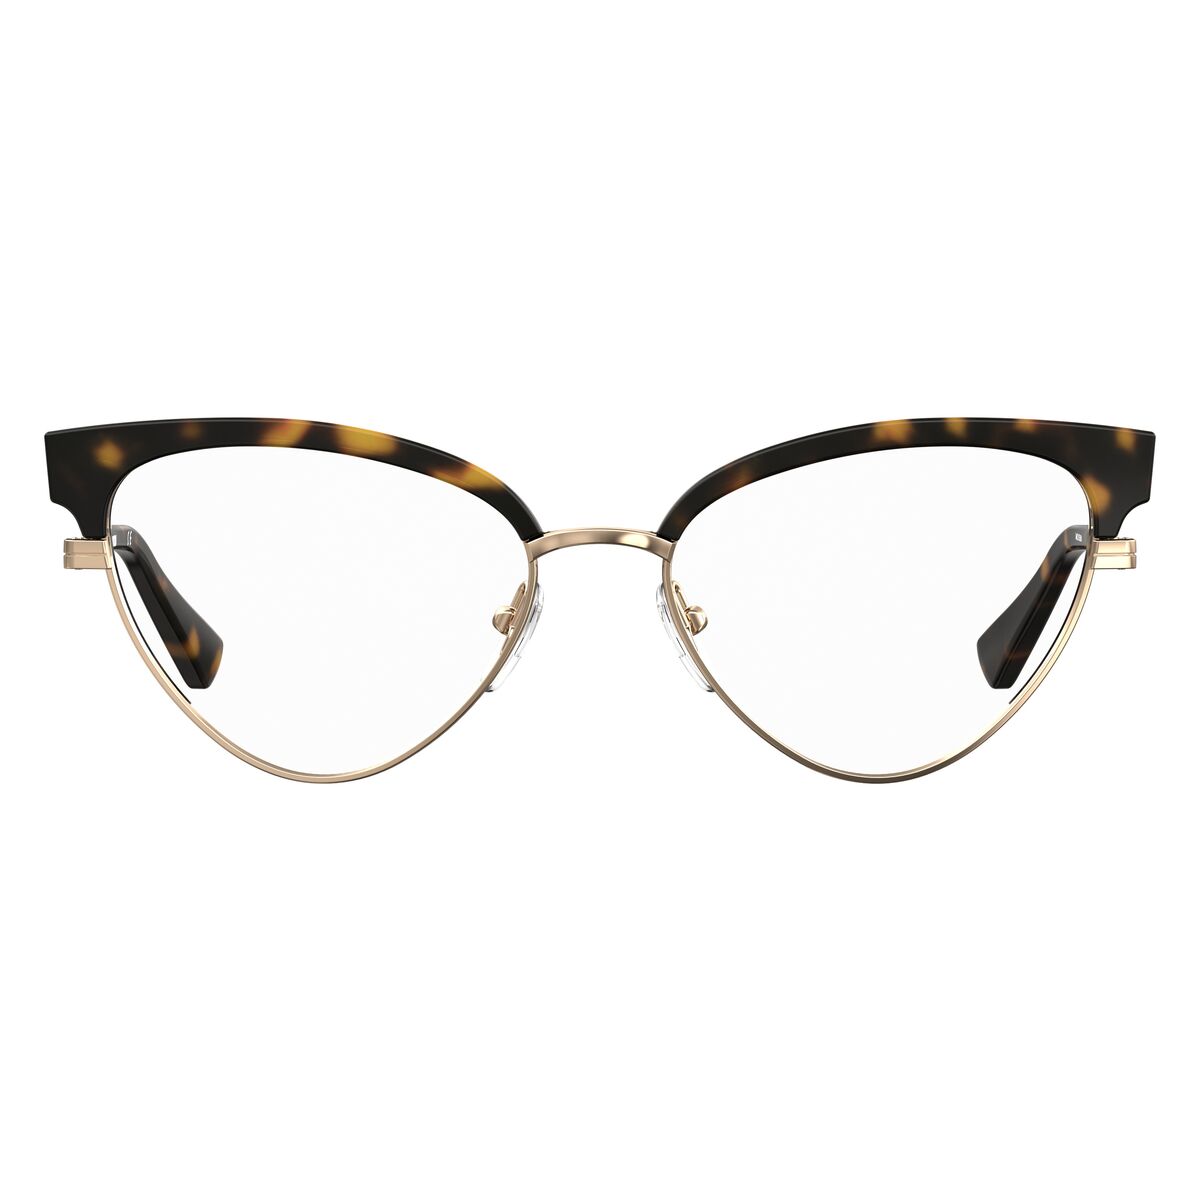 Ladies' Spectacle frame Moschino MOS560-086 Ø 52 mm